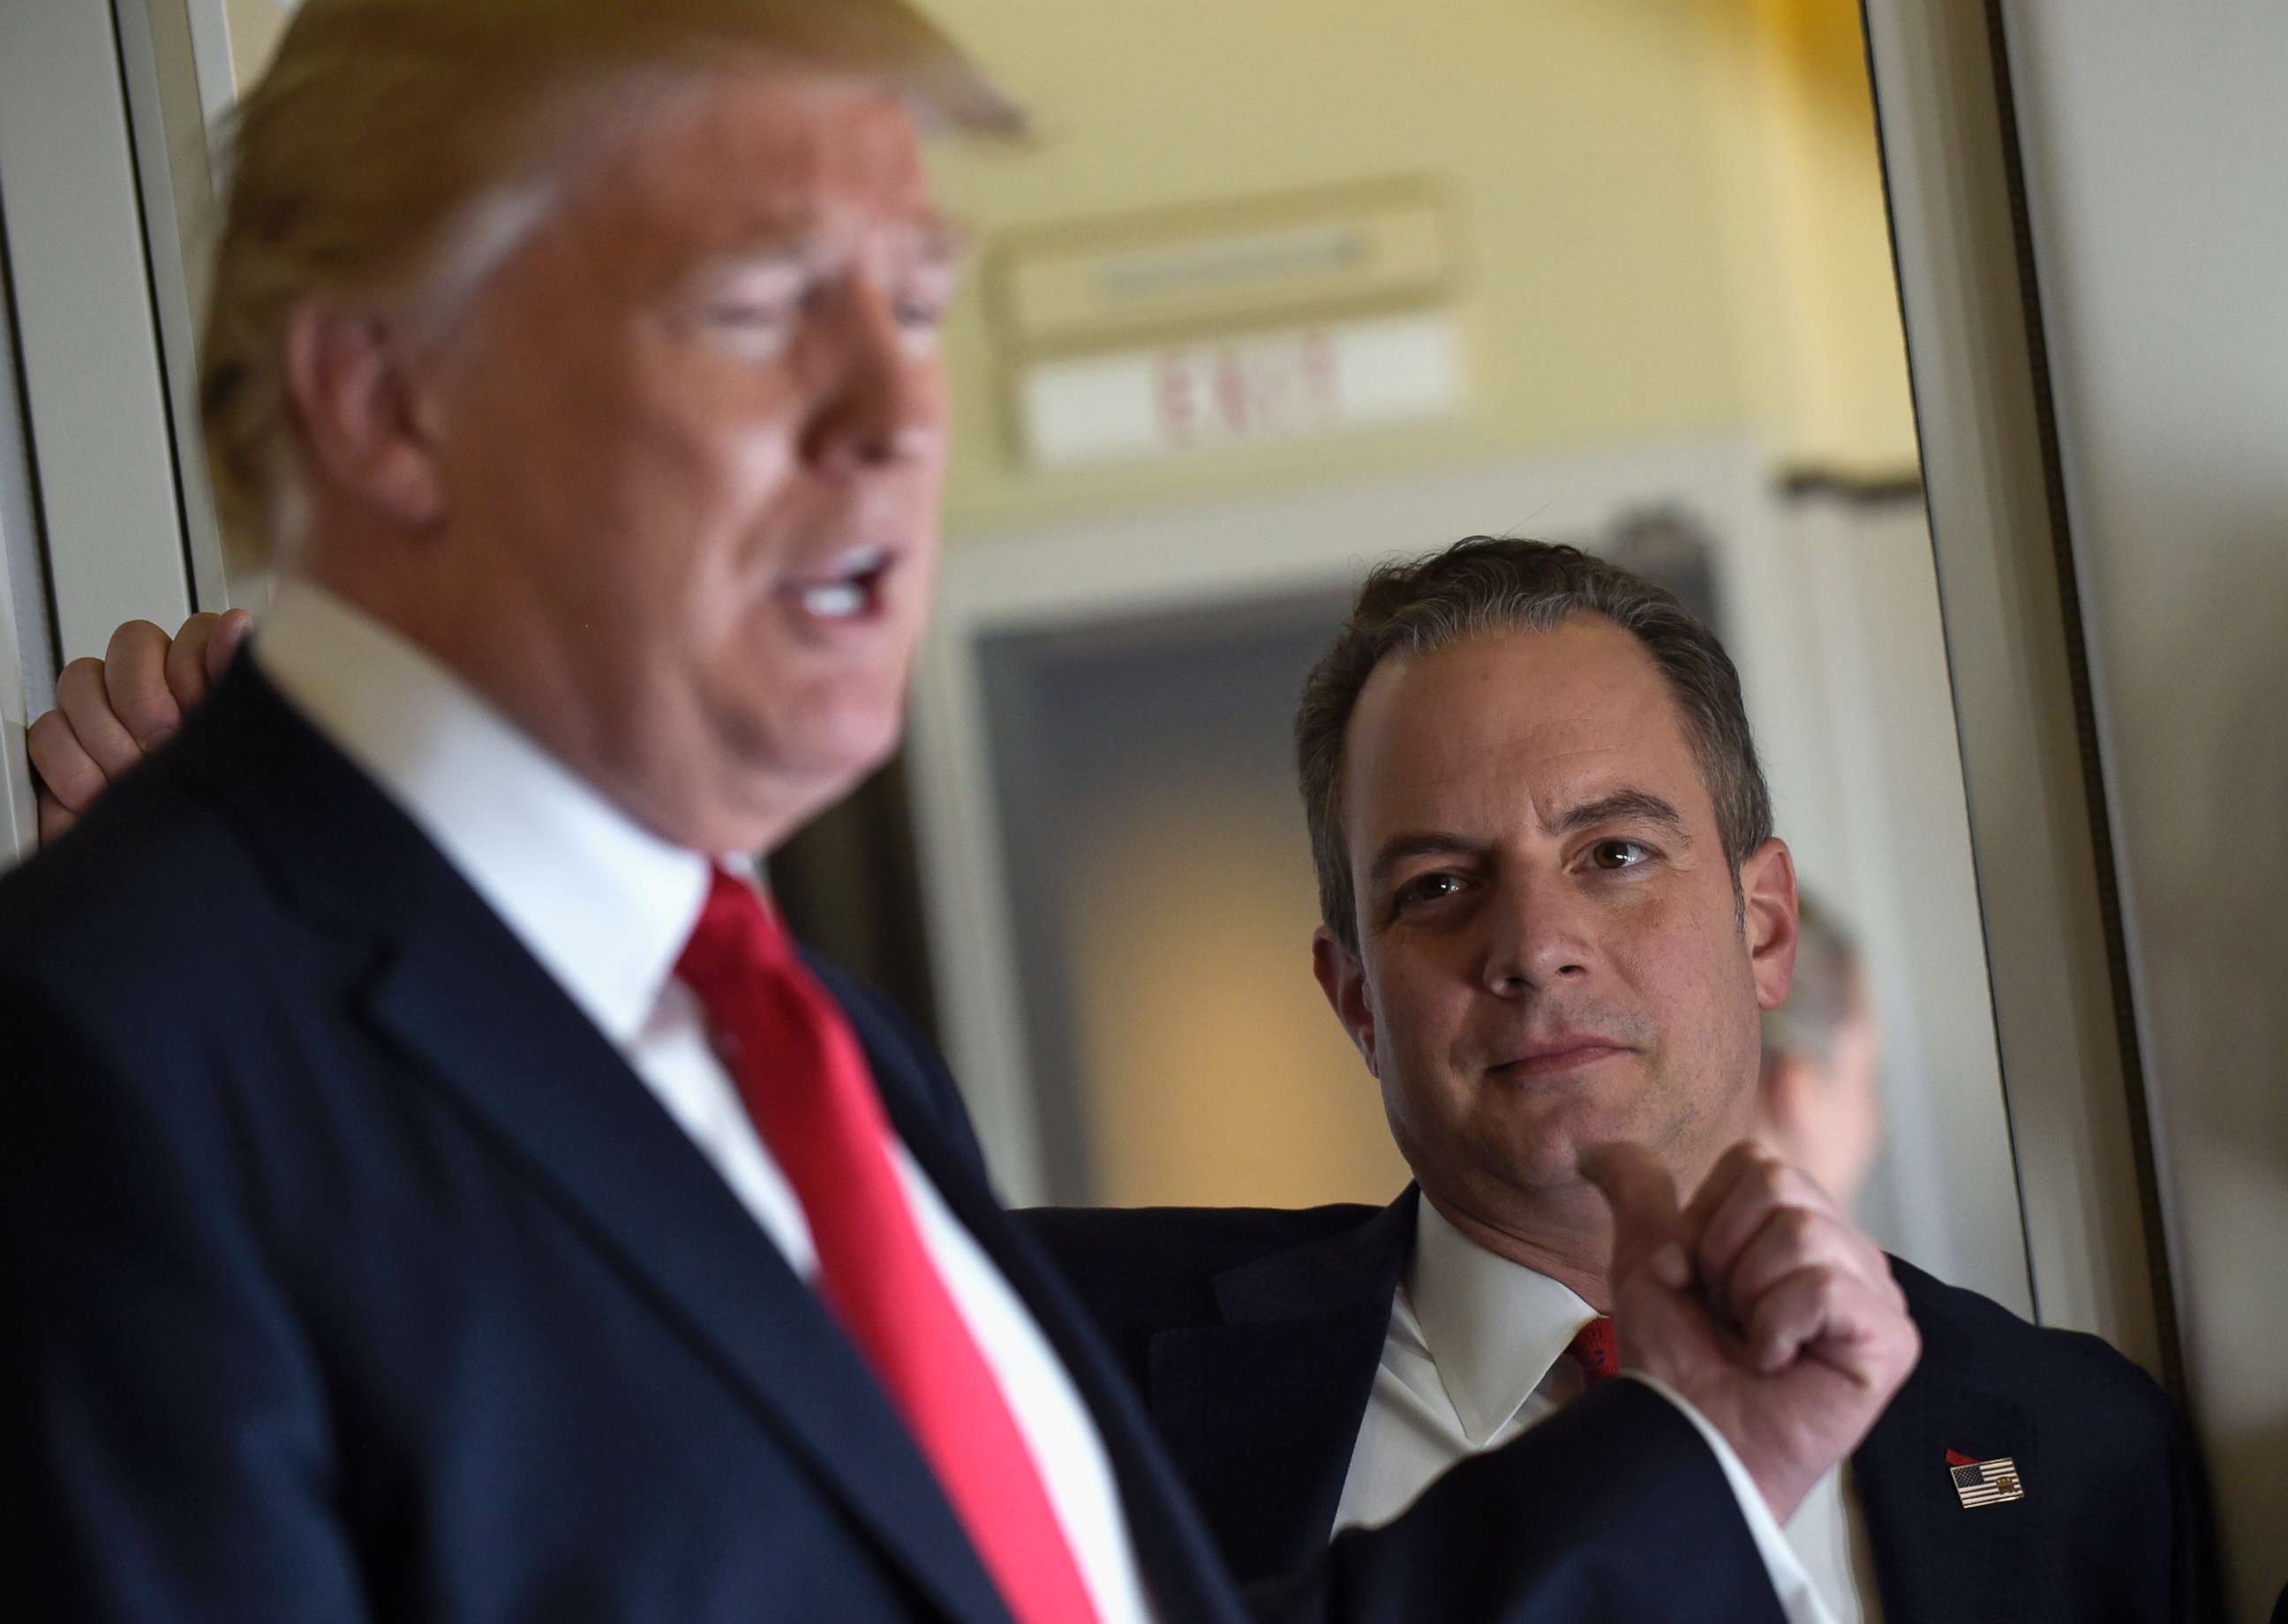 PHOTO: Then-White House Chief of Staff Reince Priebus listens at right as President Donald Trump speaks to reporters on Air Force One while traveling to Palm Beach International Airport in West Palm Beach, Fla., Friday, Feb. 3, 2017.